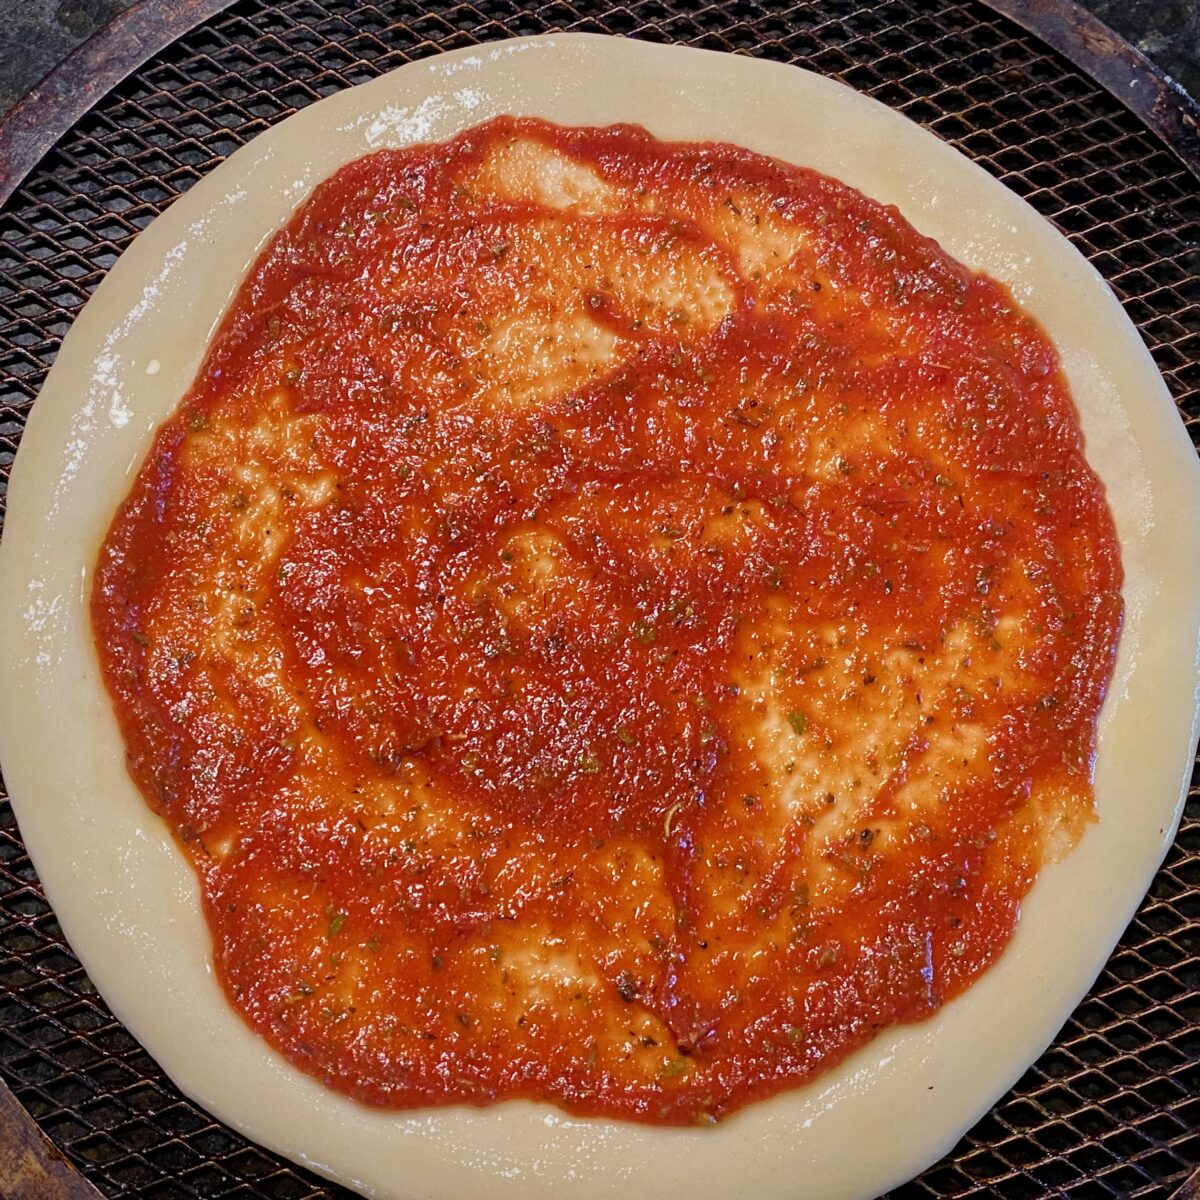 Top view of pizza sauce spread evenly on top of homemade pizza crust.